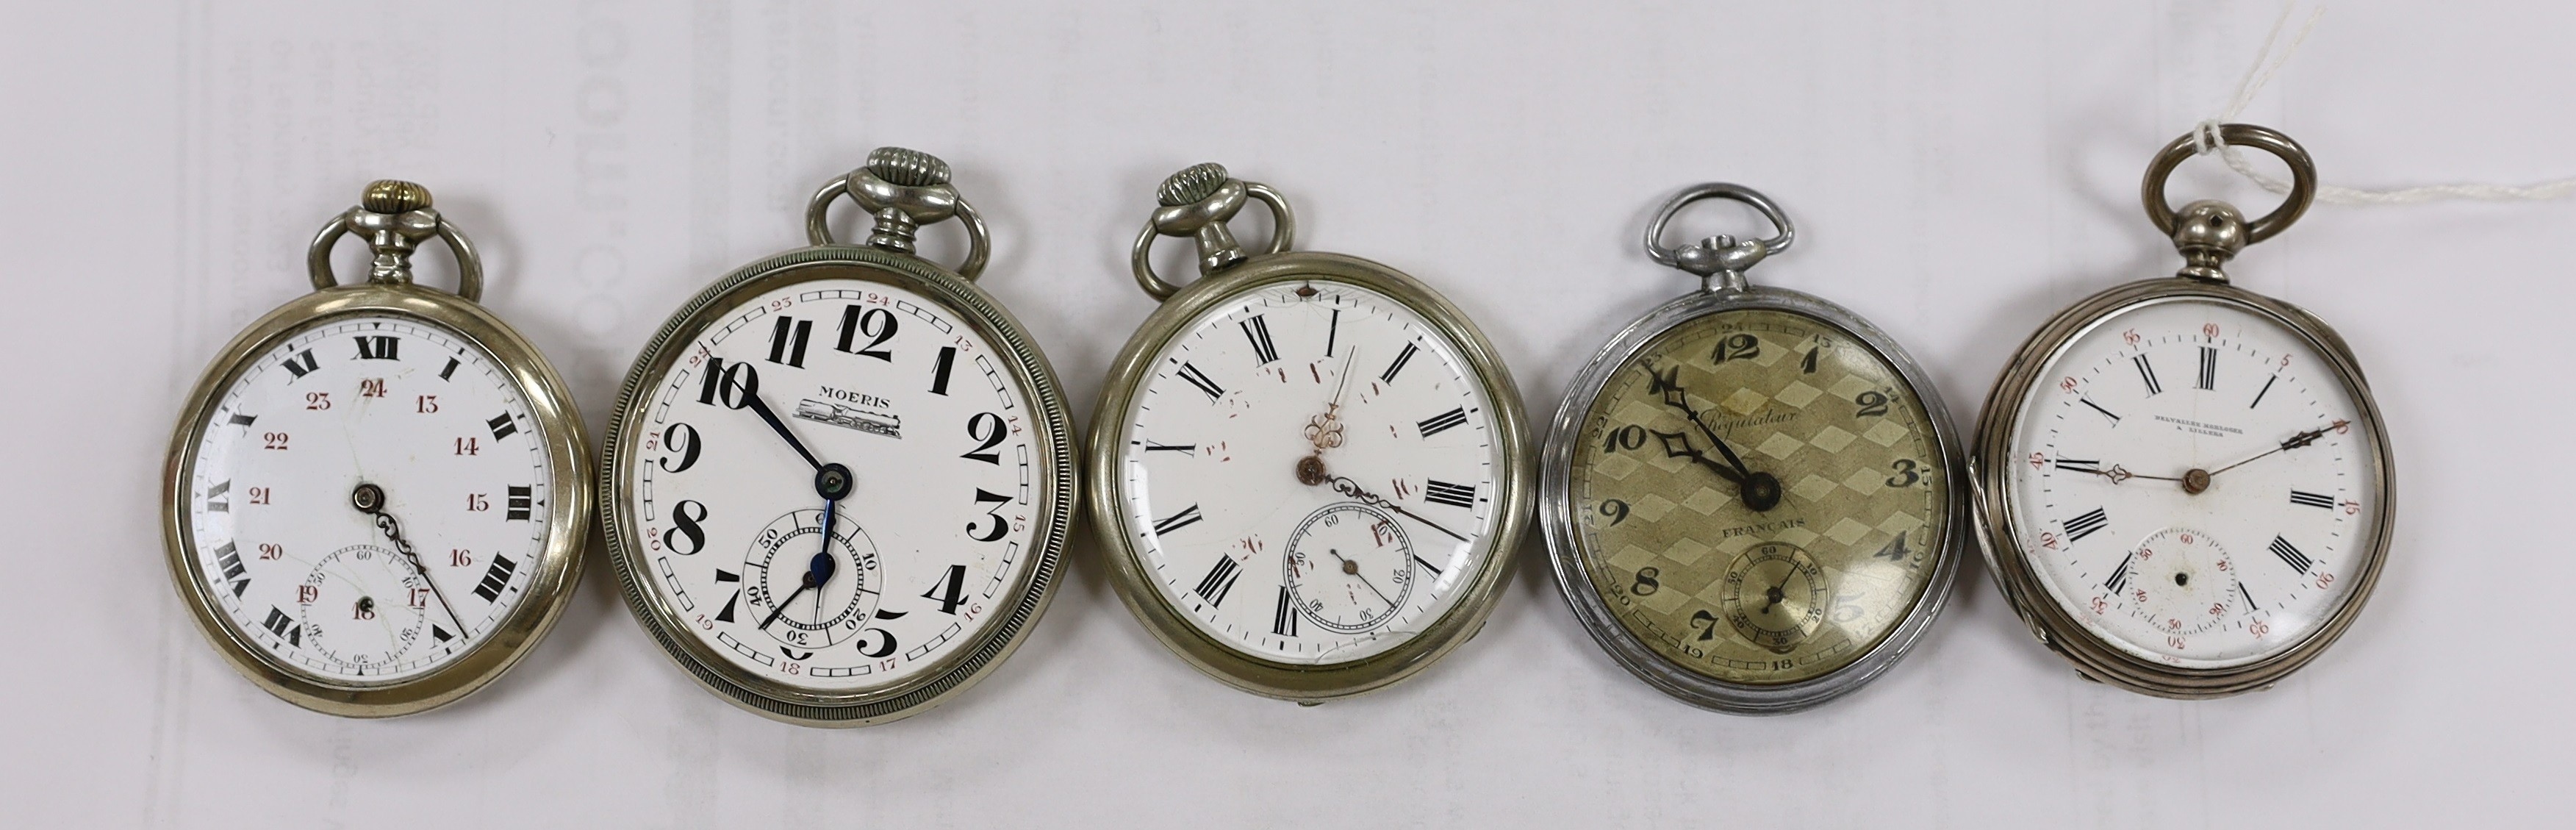 A French white metal open face keywind pocket watch, retailed by Delvallez, Horloger A Lillers and four other chrome or nickel cased pocket watches including Moeris.